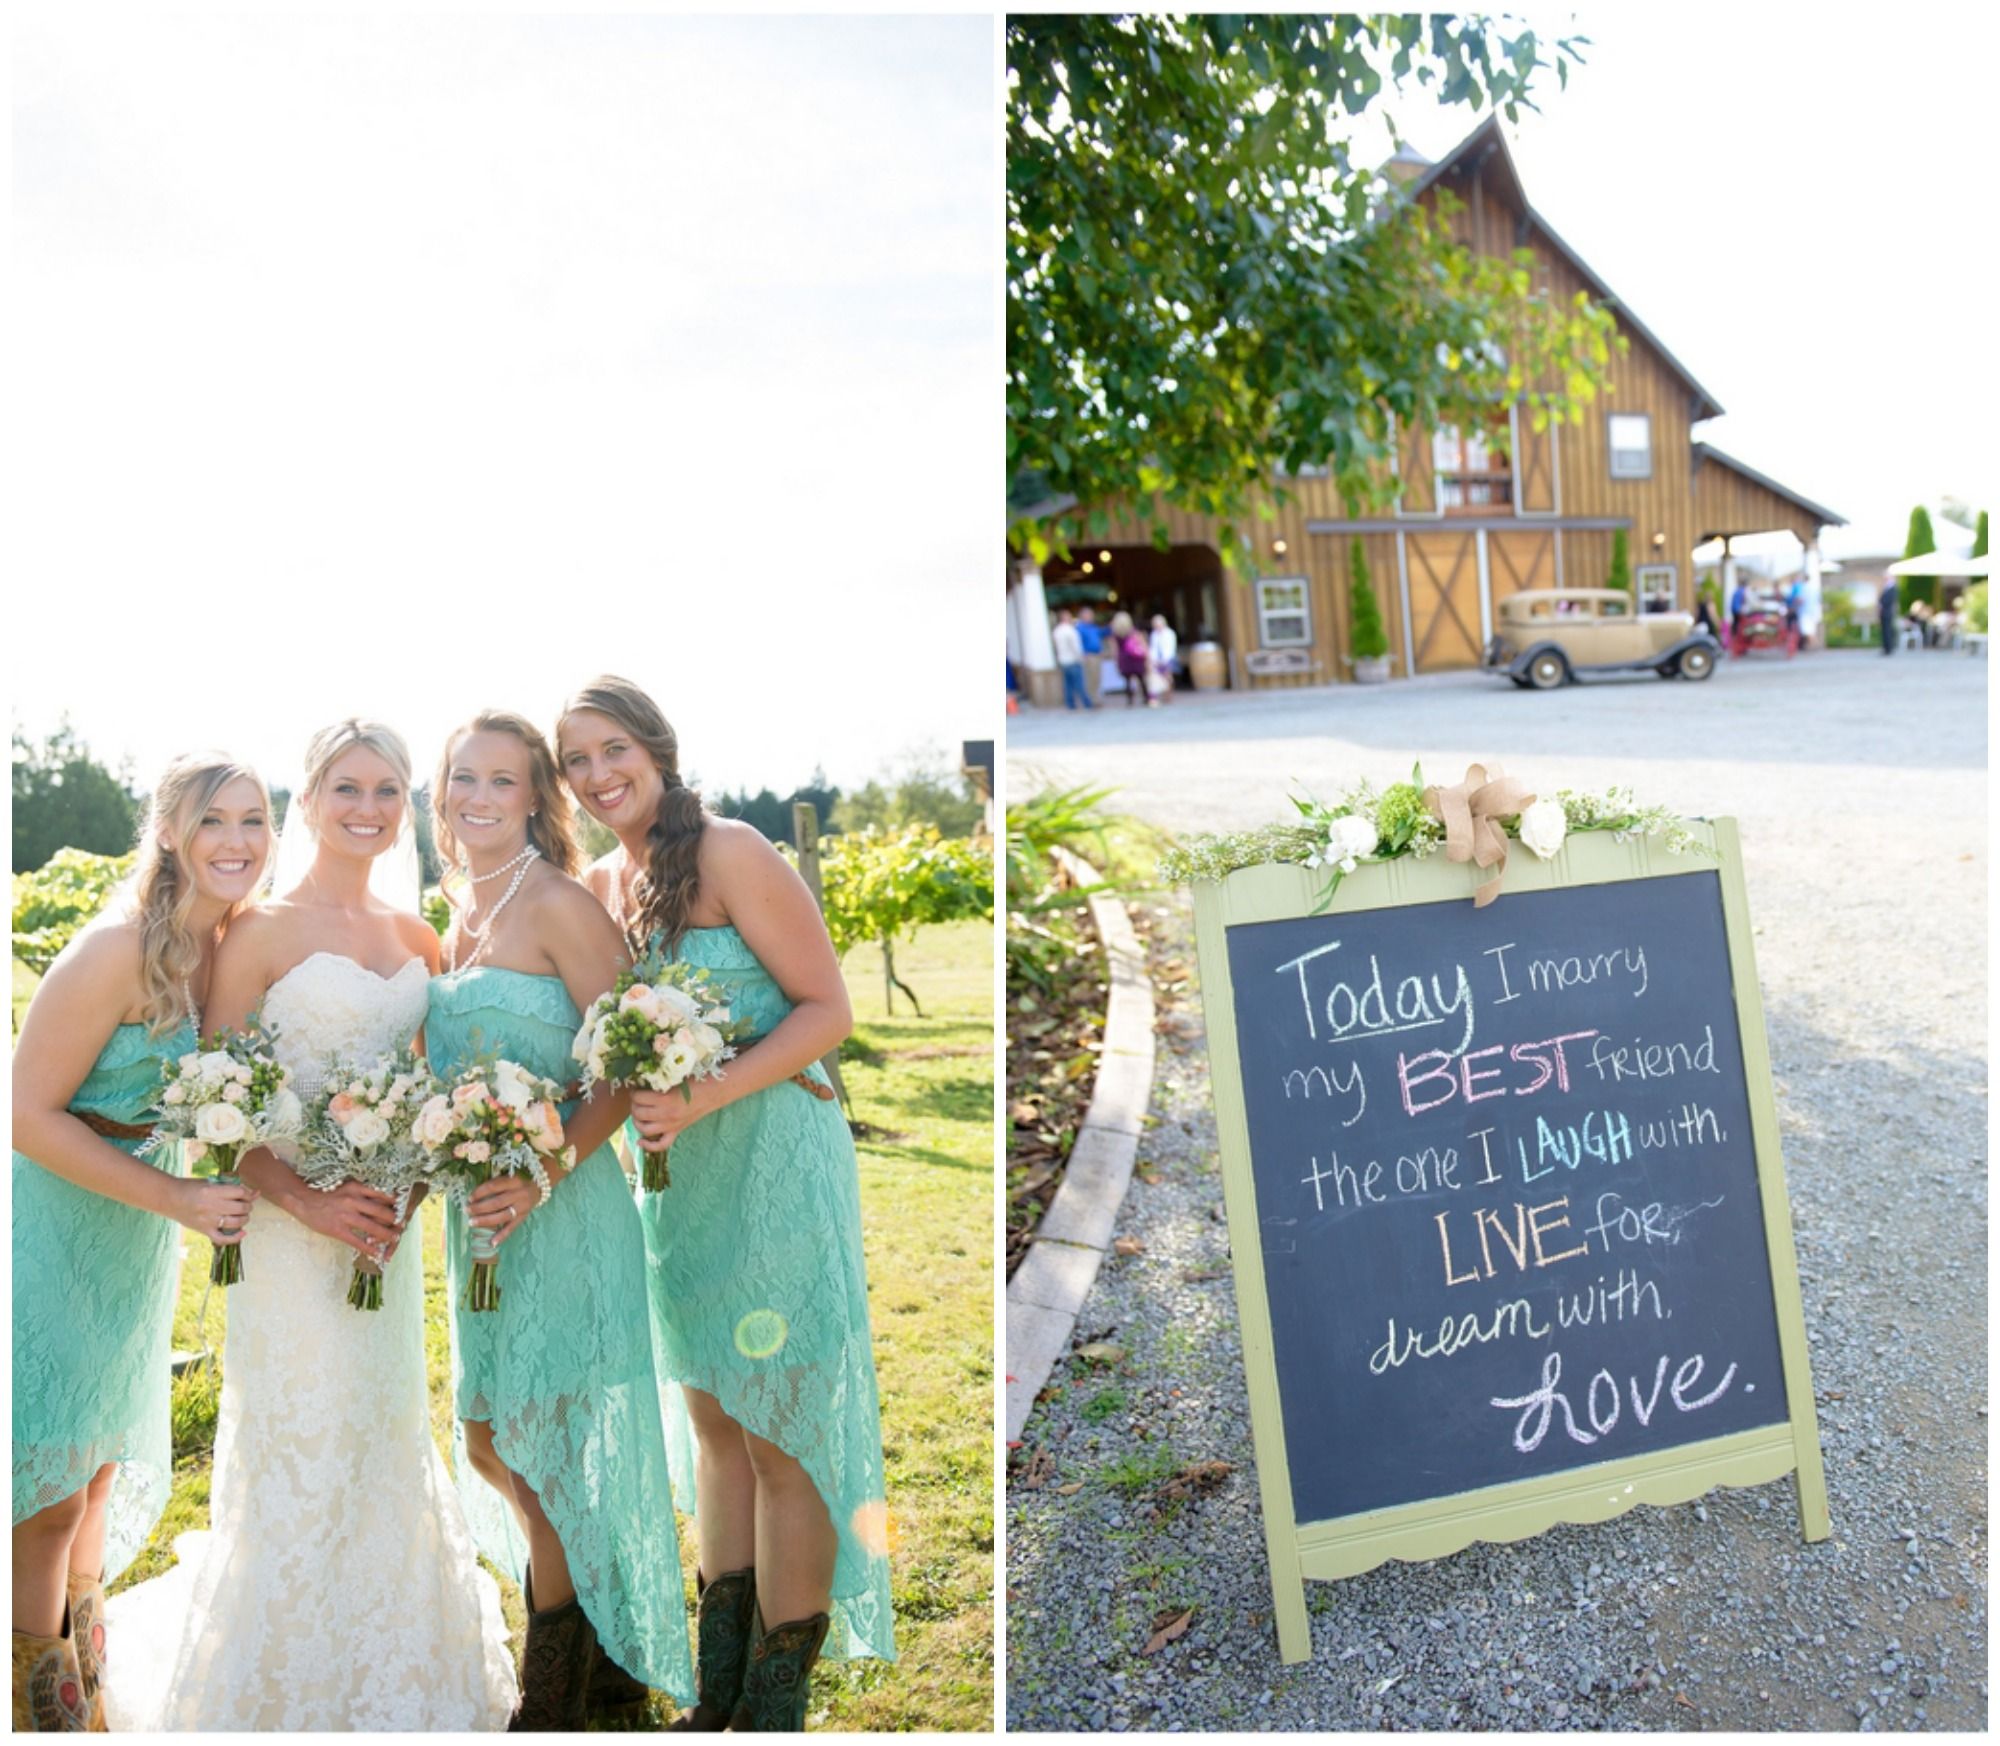 Country Wedding On A Budget - Rustic Wedding Chic